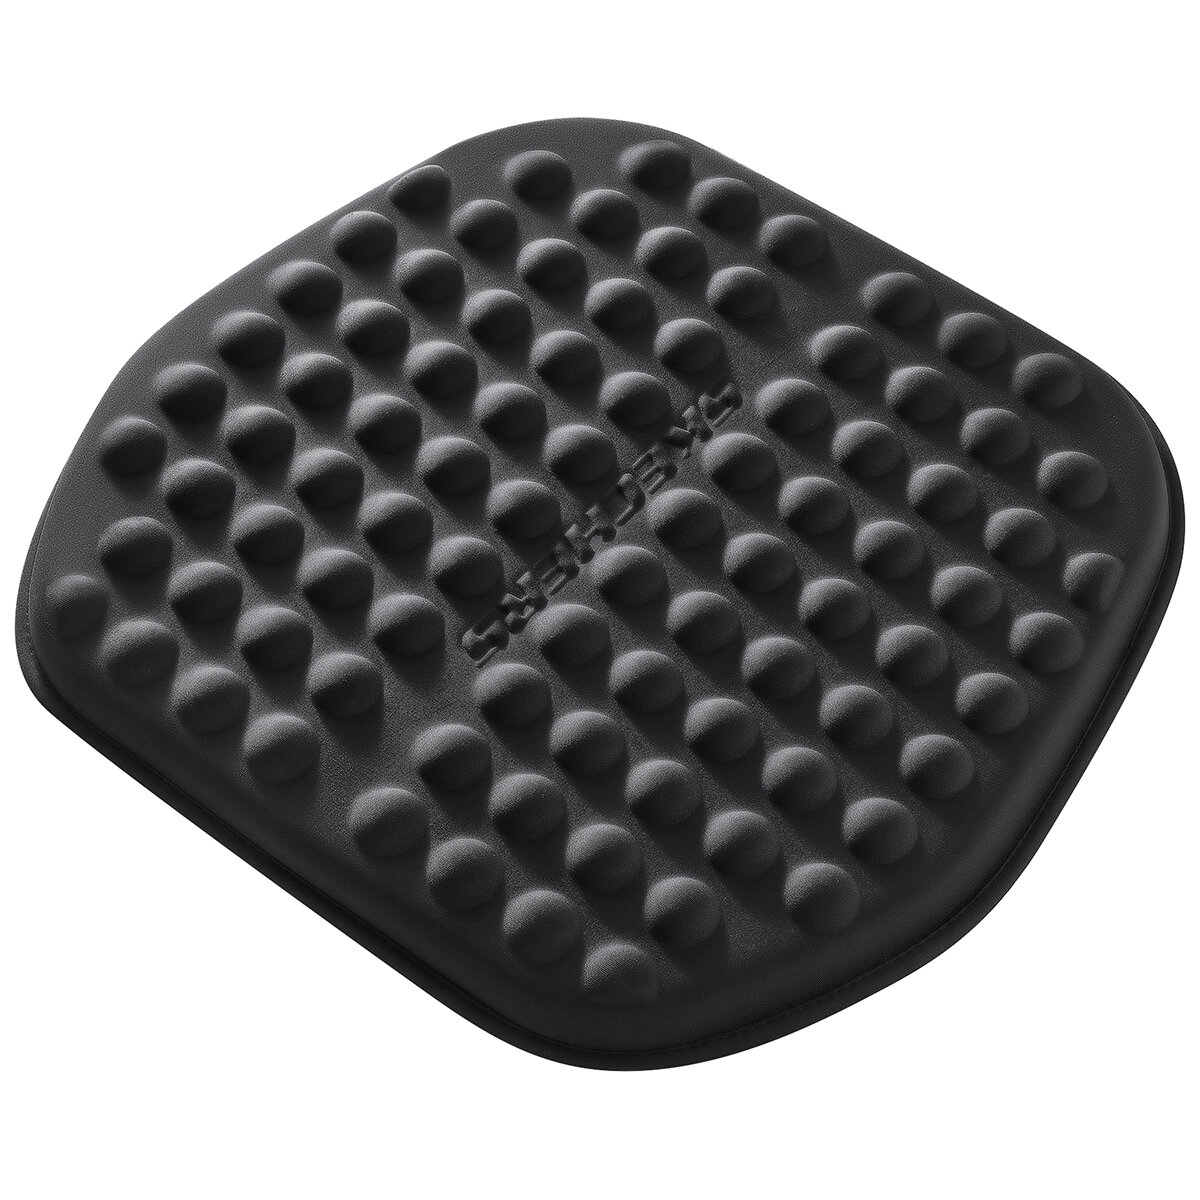 Skechers All Day Comfort Seat Cushion